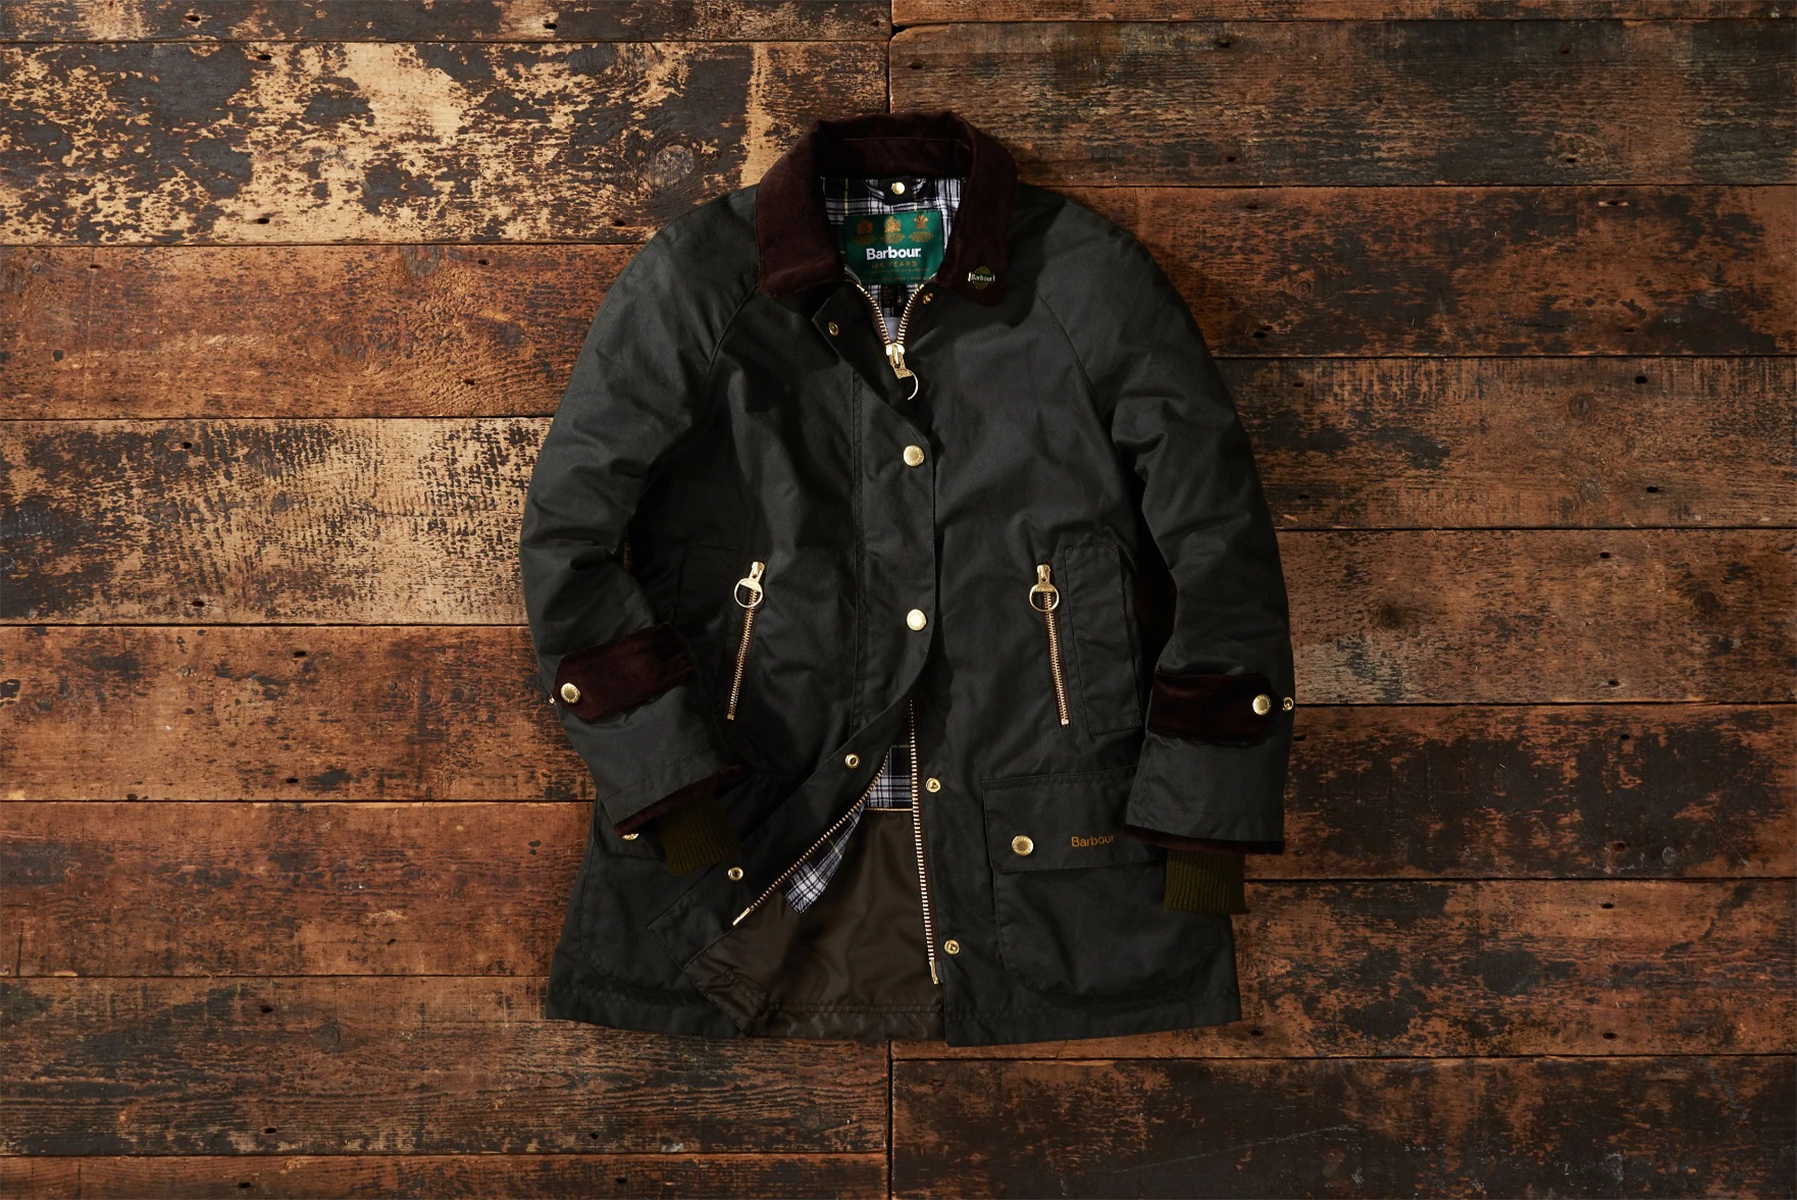 2019 125th Barbour icons international S